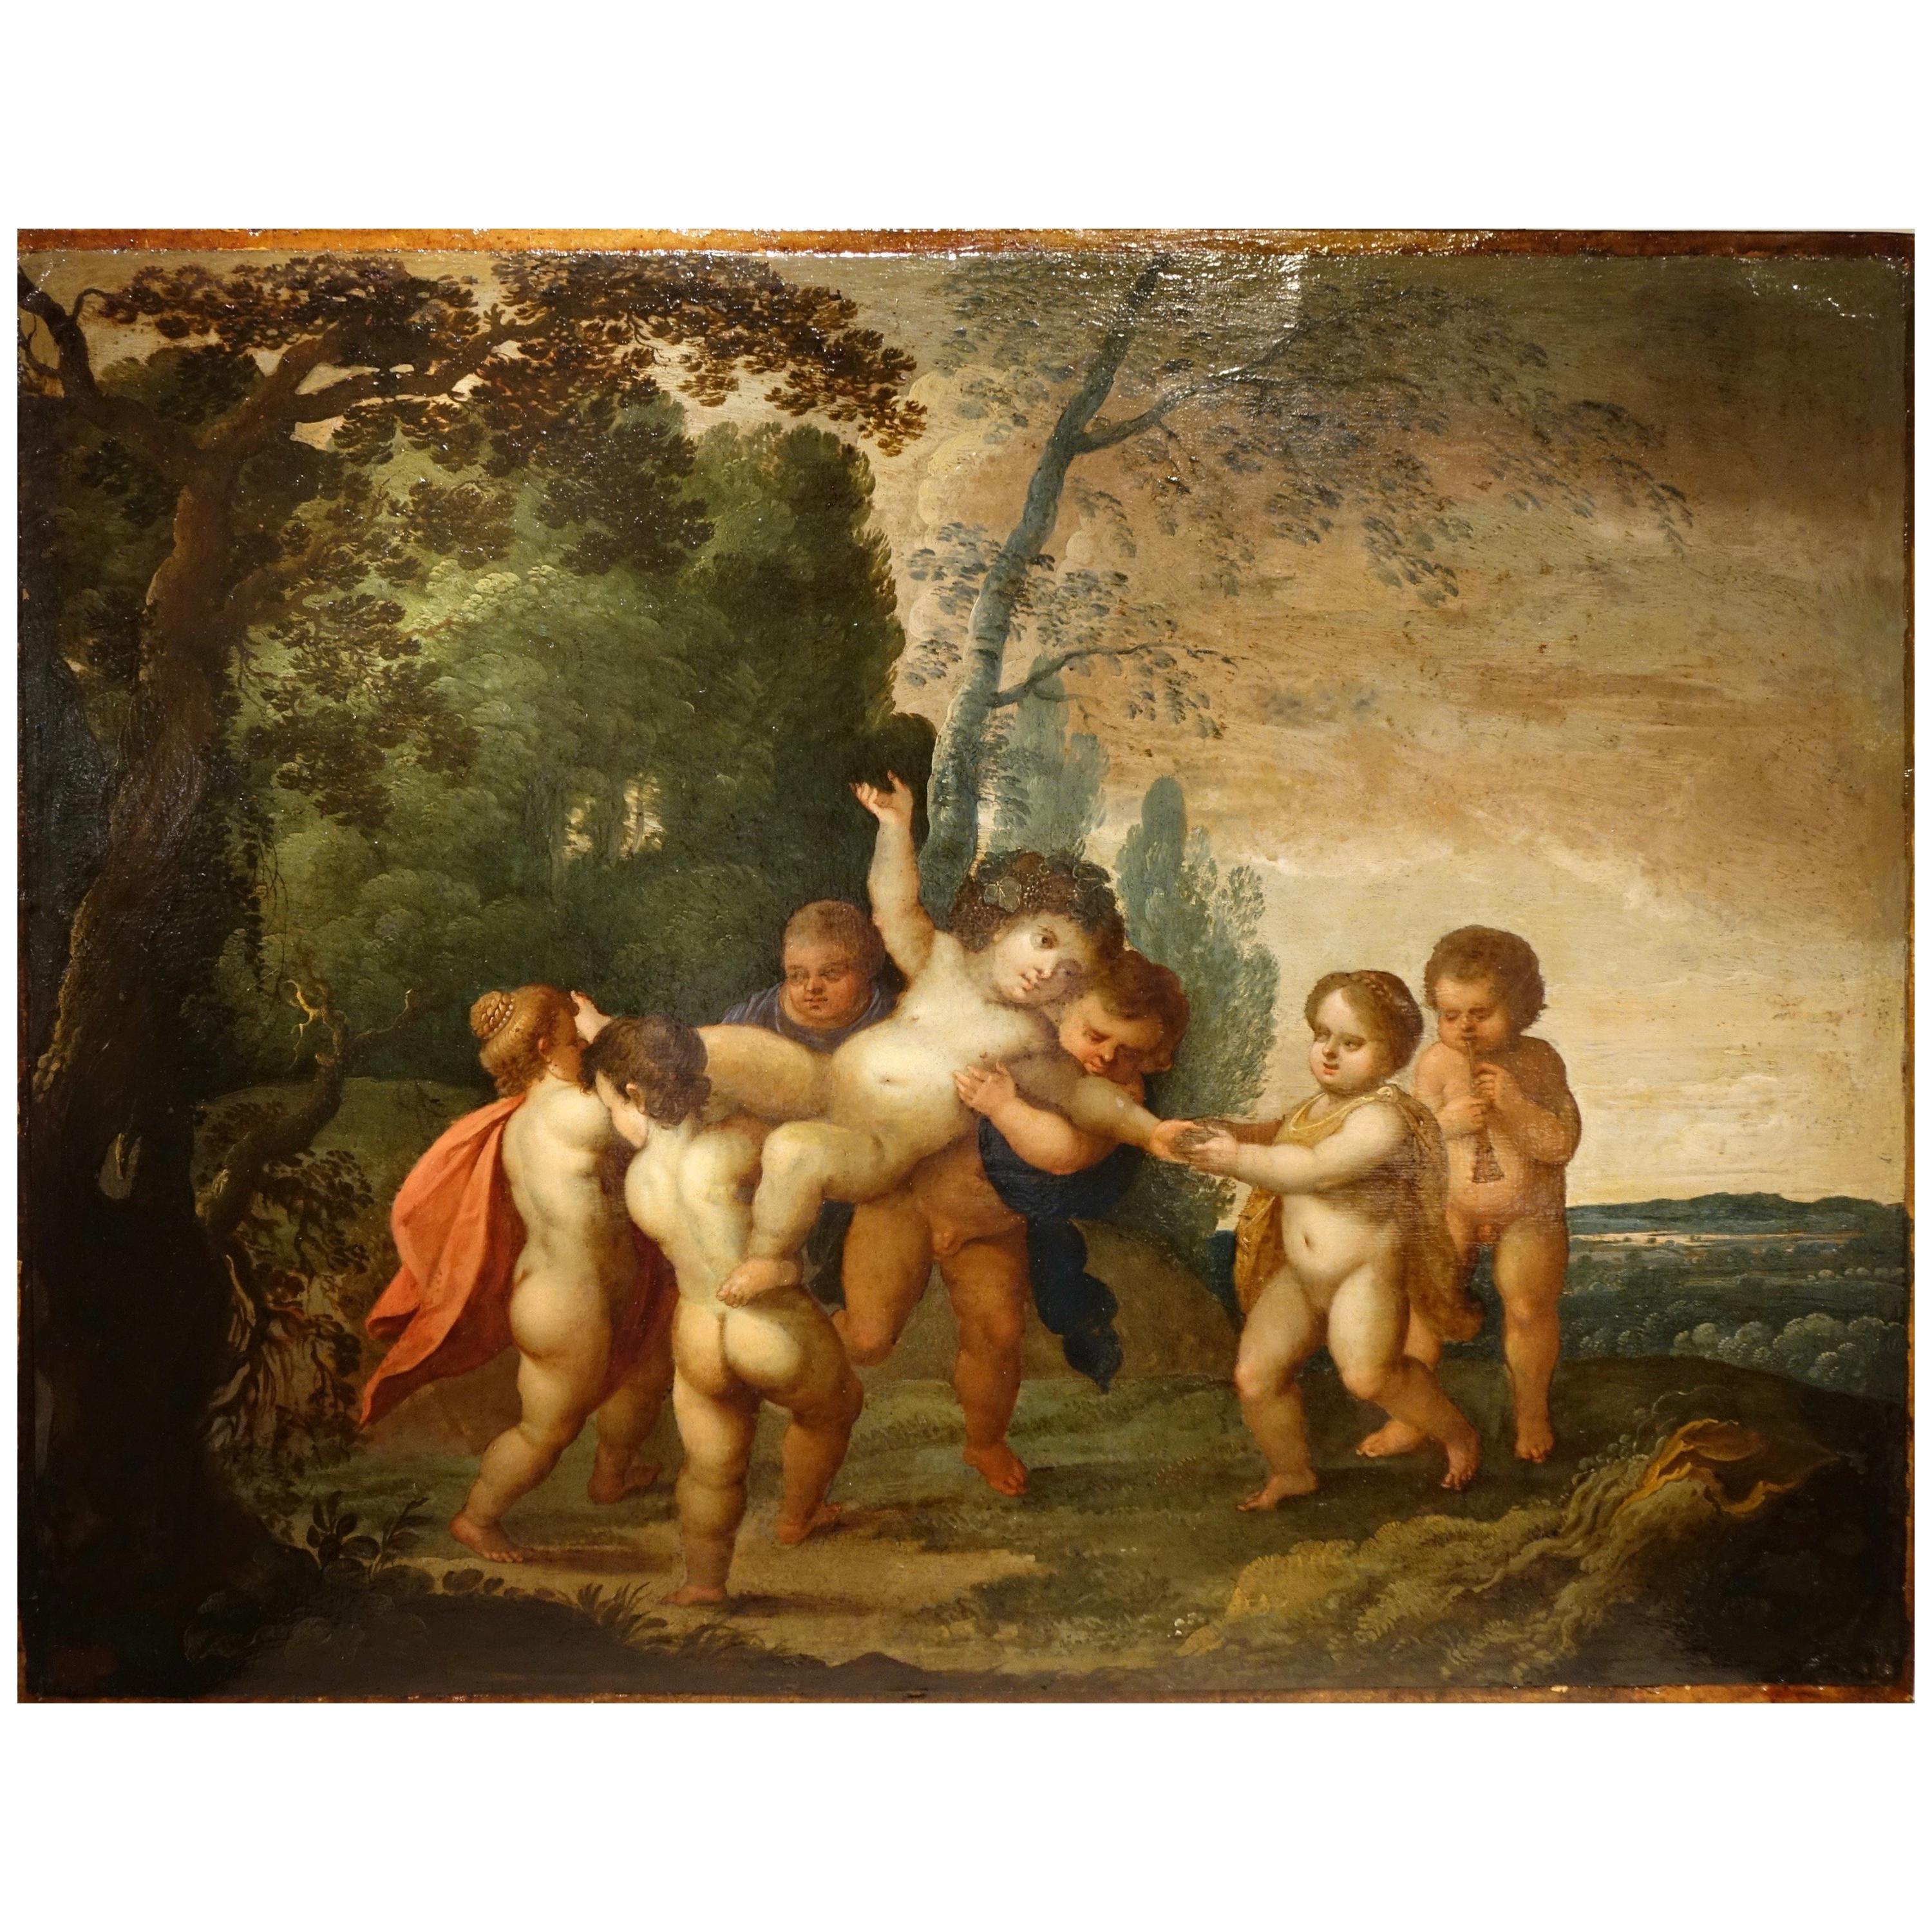 The Childhood of Bacchus, 17th century Flemish oil on copper painting.
Attributed to the Jan van Balen (1611-1654) who was a Flemish painter known for his Baroque paintings of history and allegorical subjects.
Oil on copper
Illegible collection